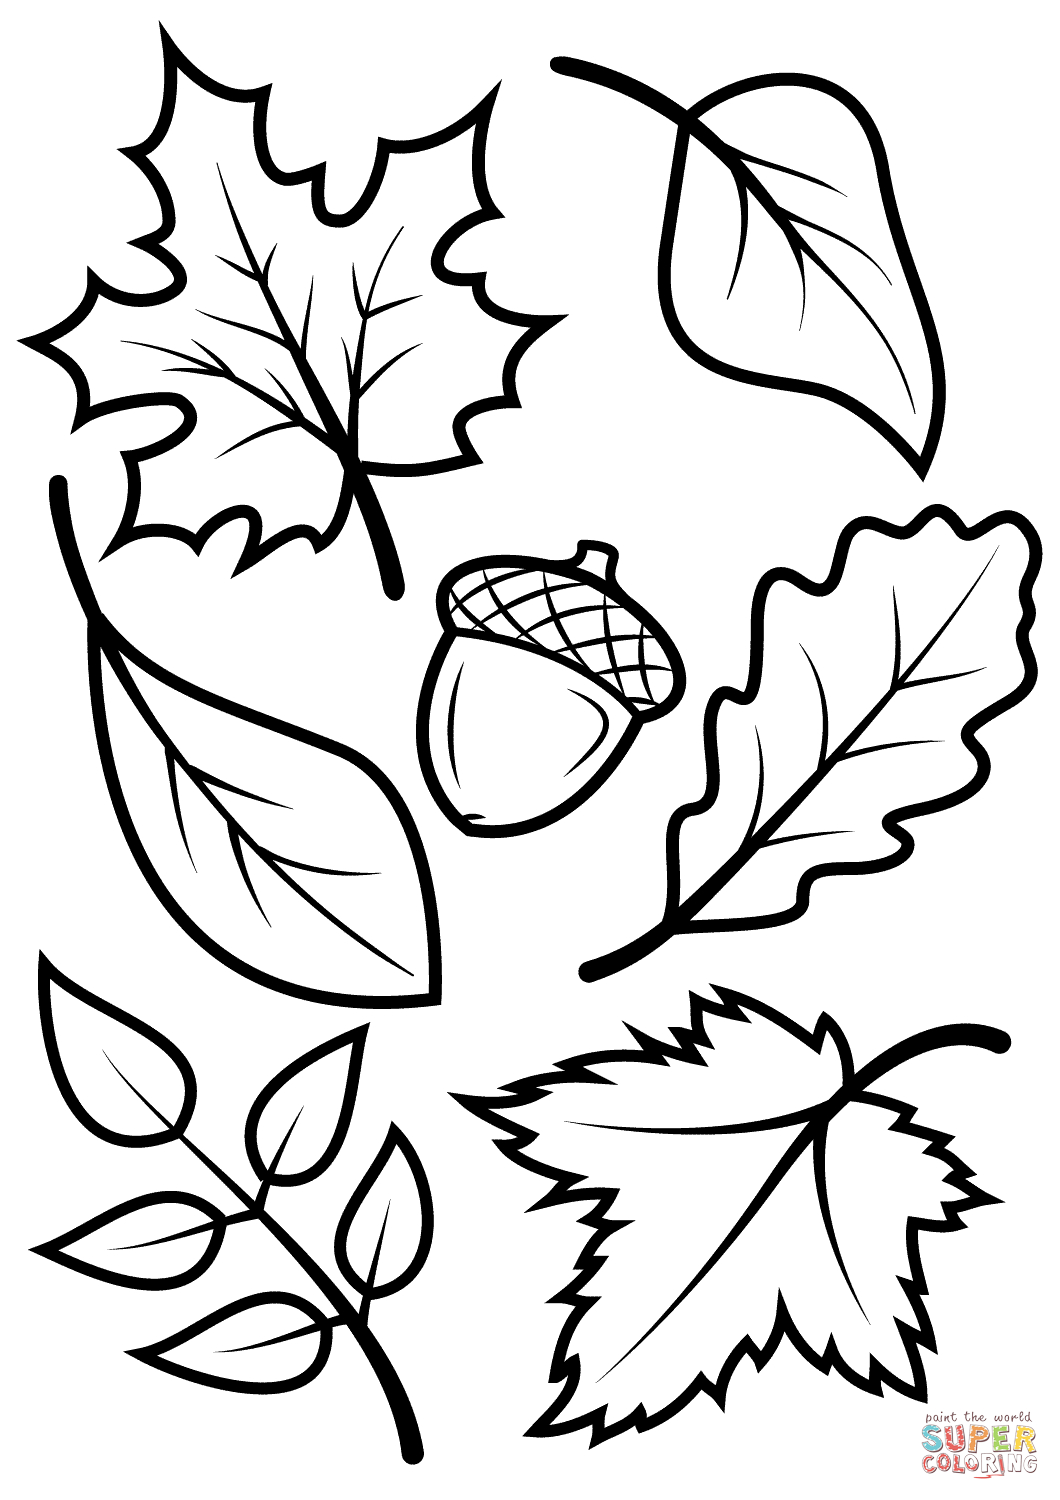 Fall Leaves And Acorn Coloring Page | Free Printable Coloring Pages - Free Printable Coloring Pages Fall Season